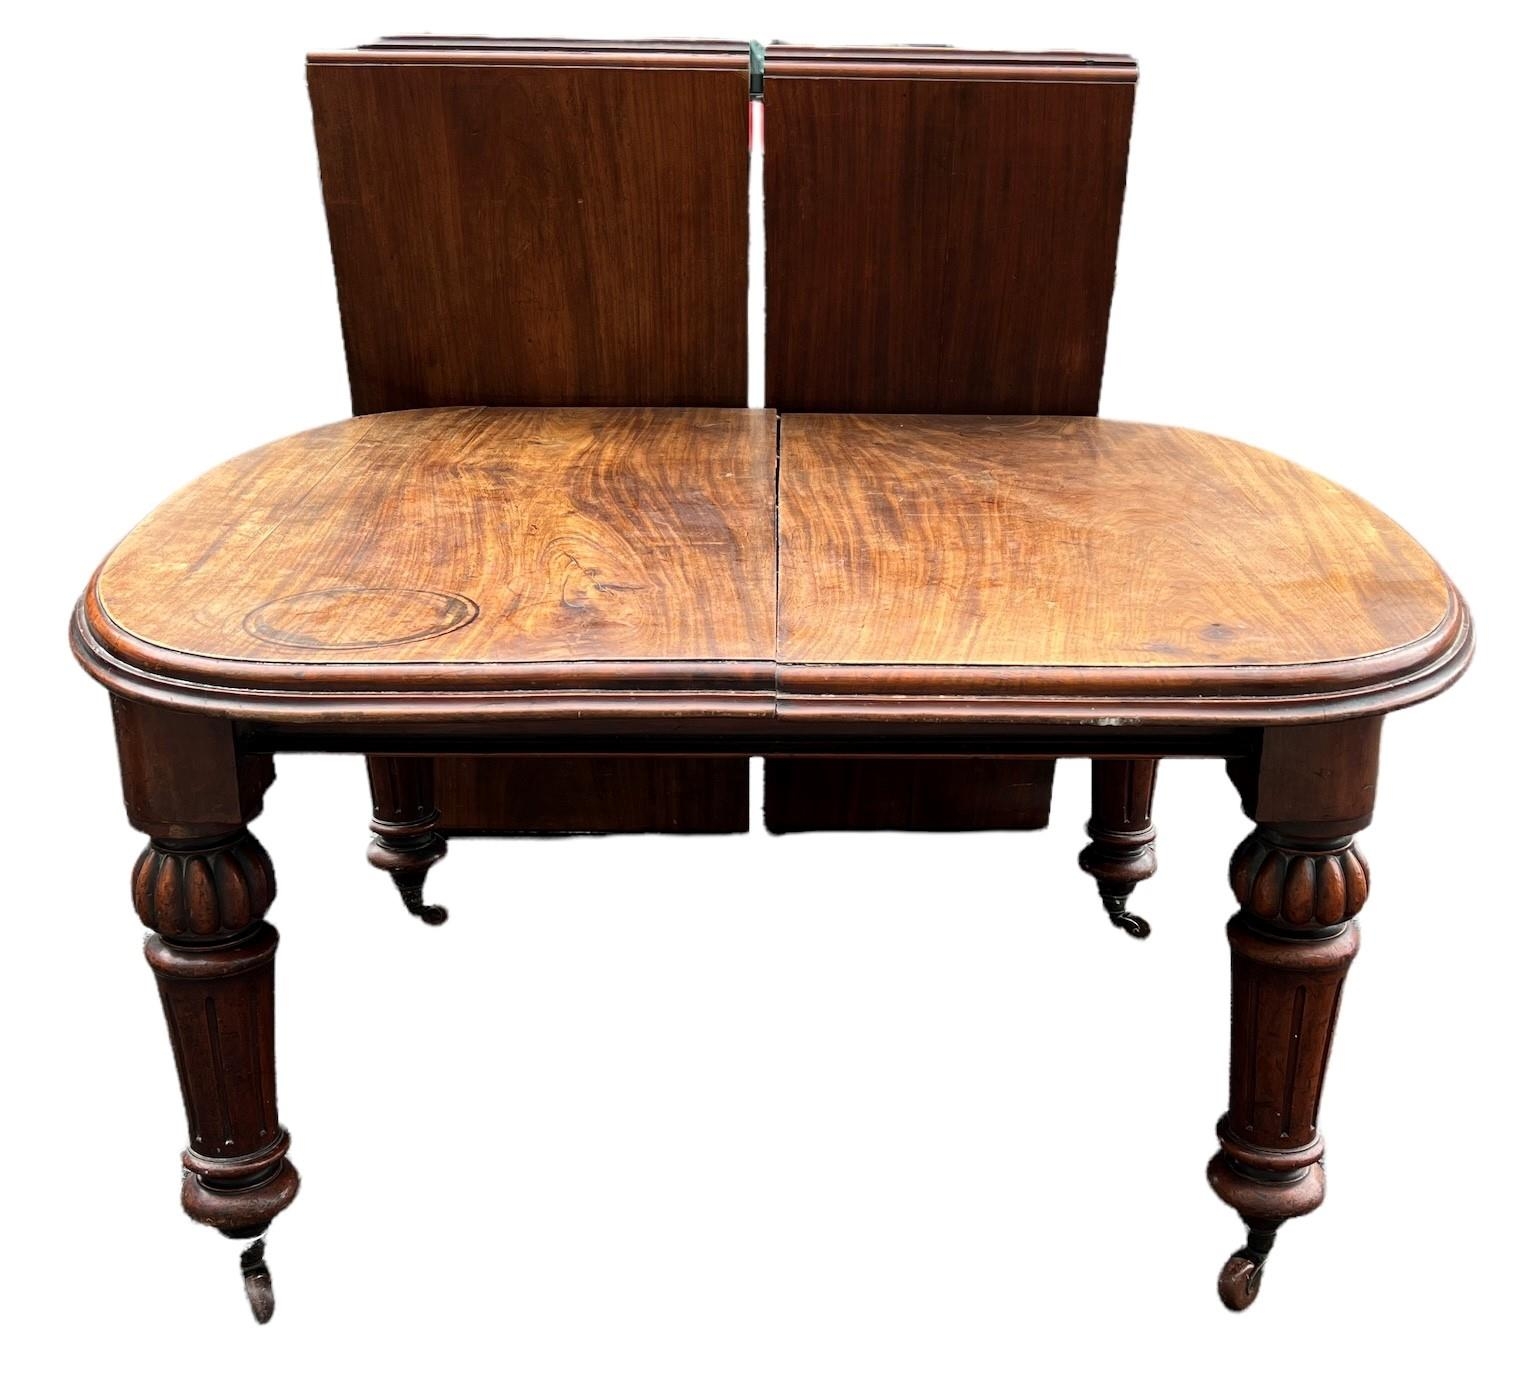 A 19TH CENTURY SOLID MAHOGANY EXTENDING DINING TABLE With two extra leaves, raised on bulbous and